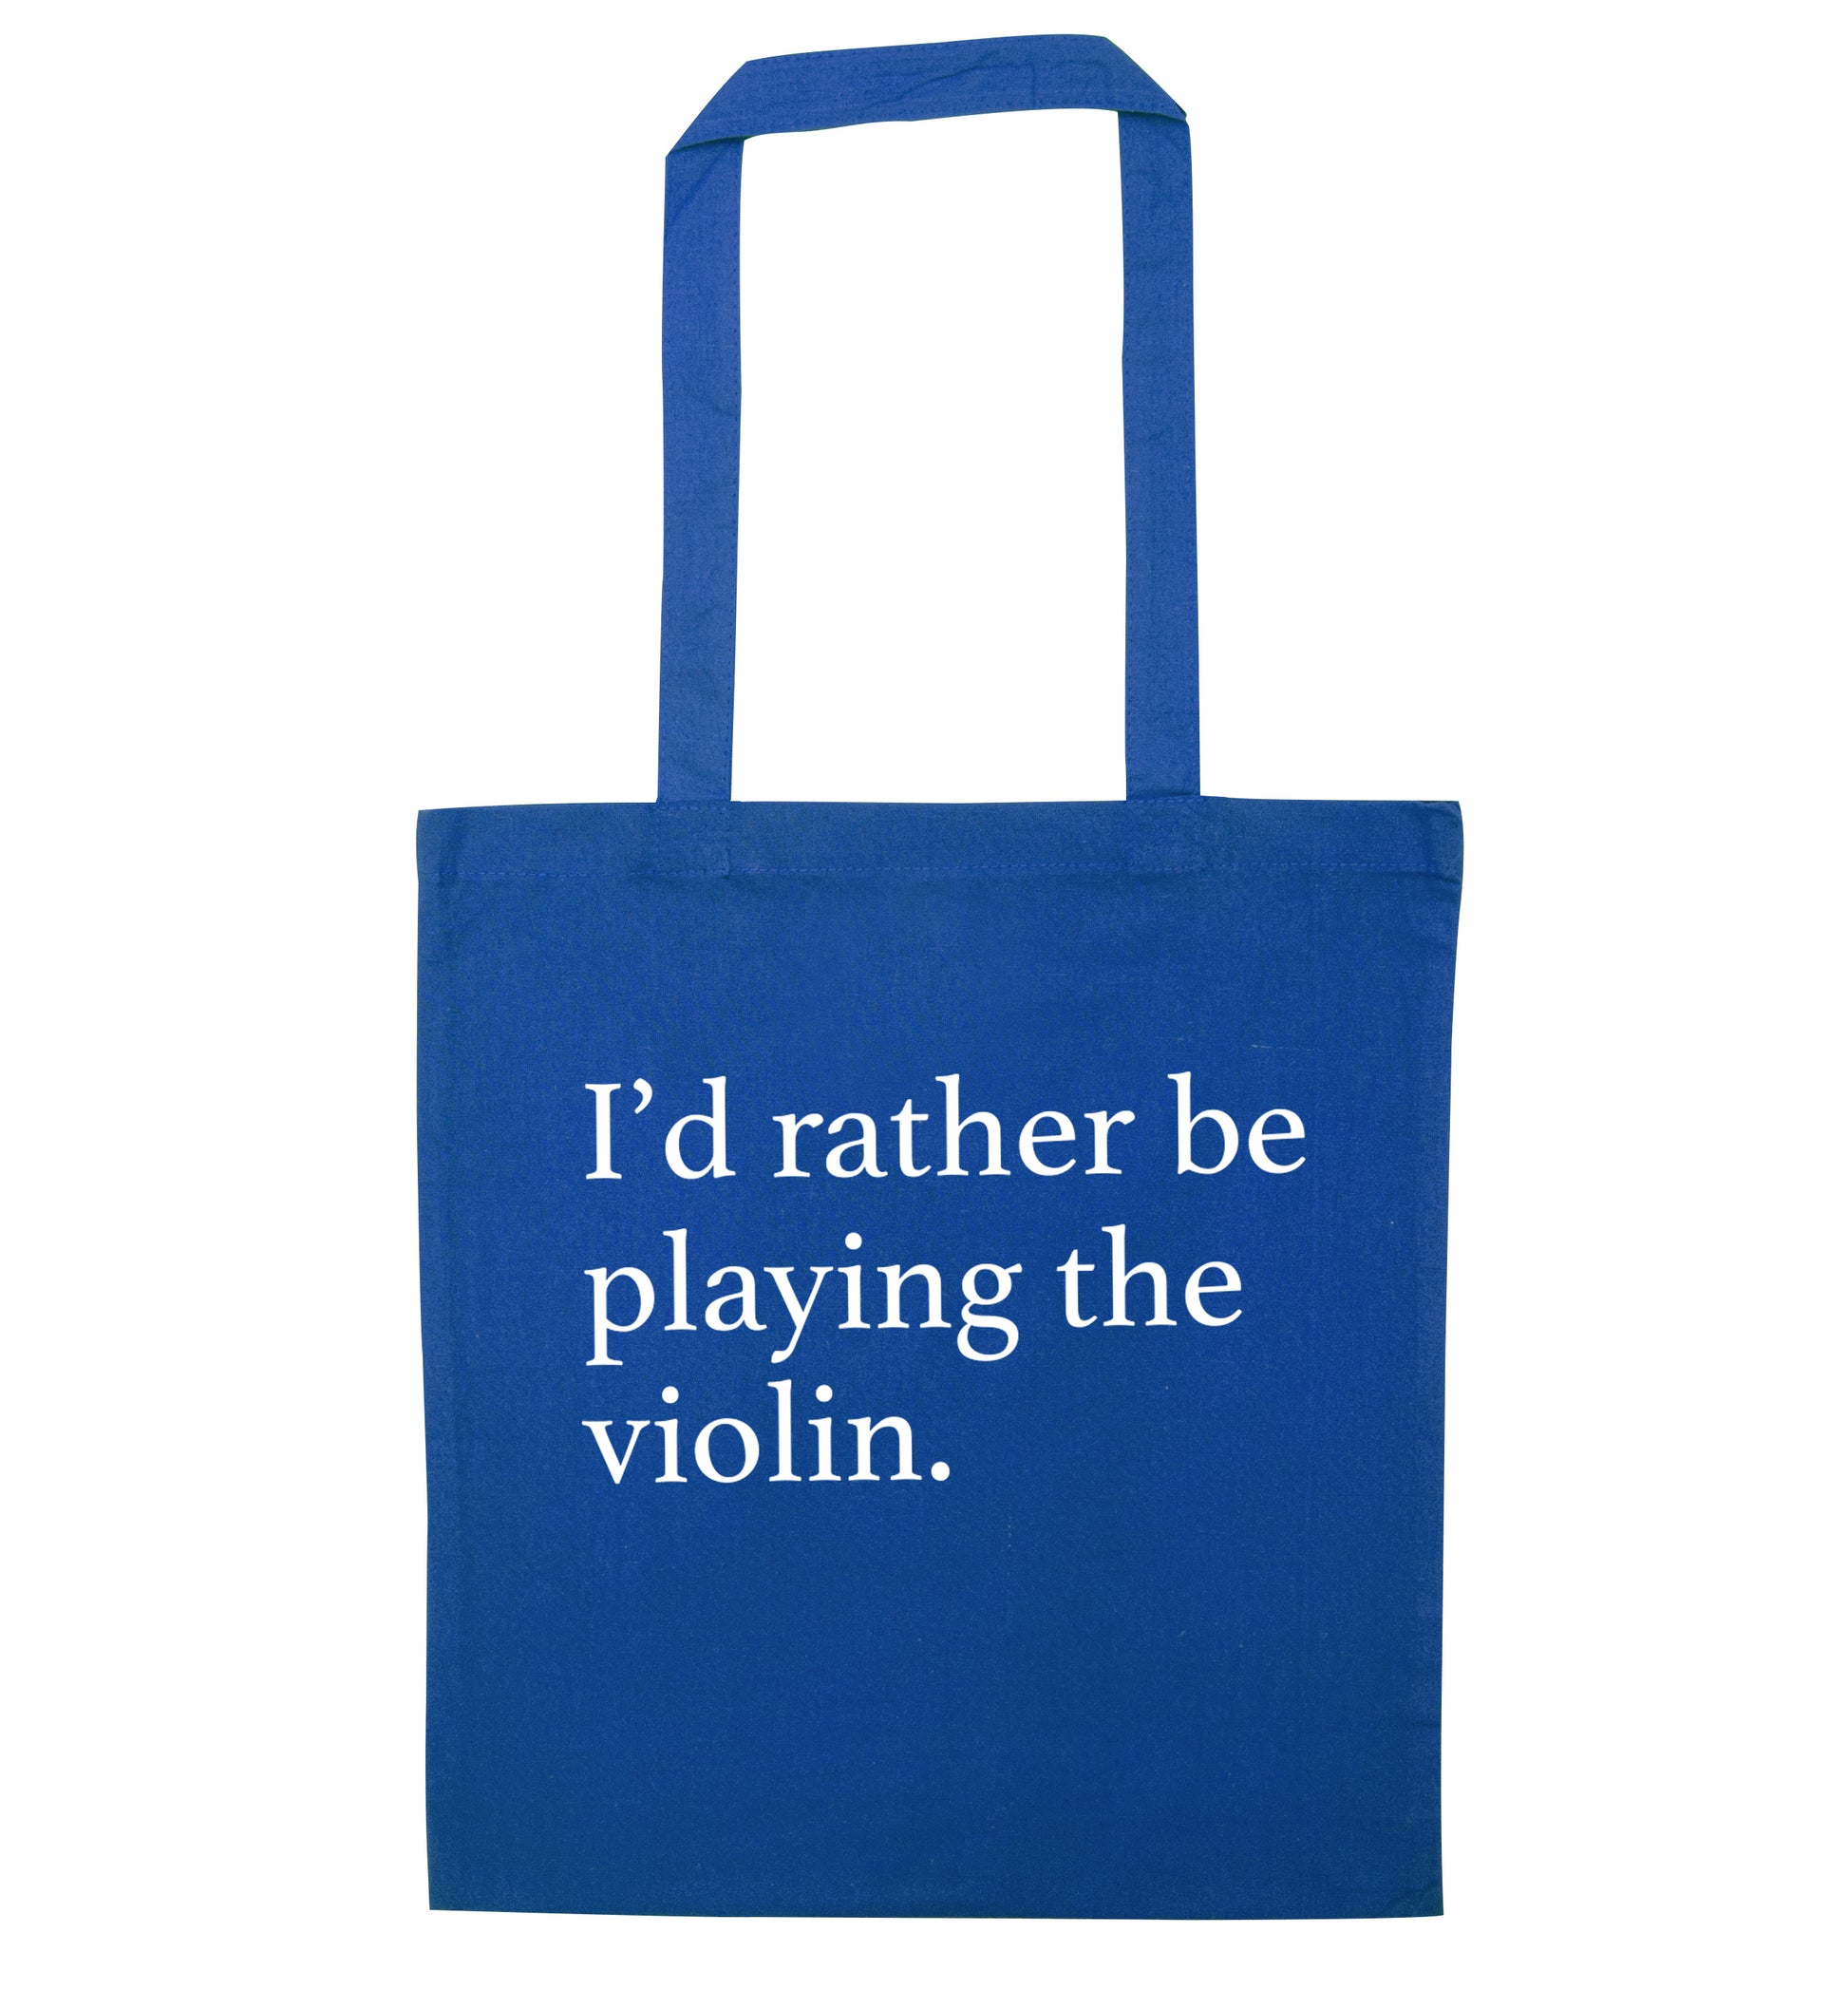 I'd rather be playing the violin blue tote bag